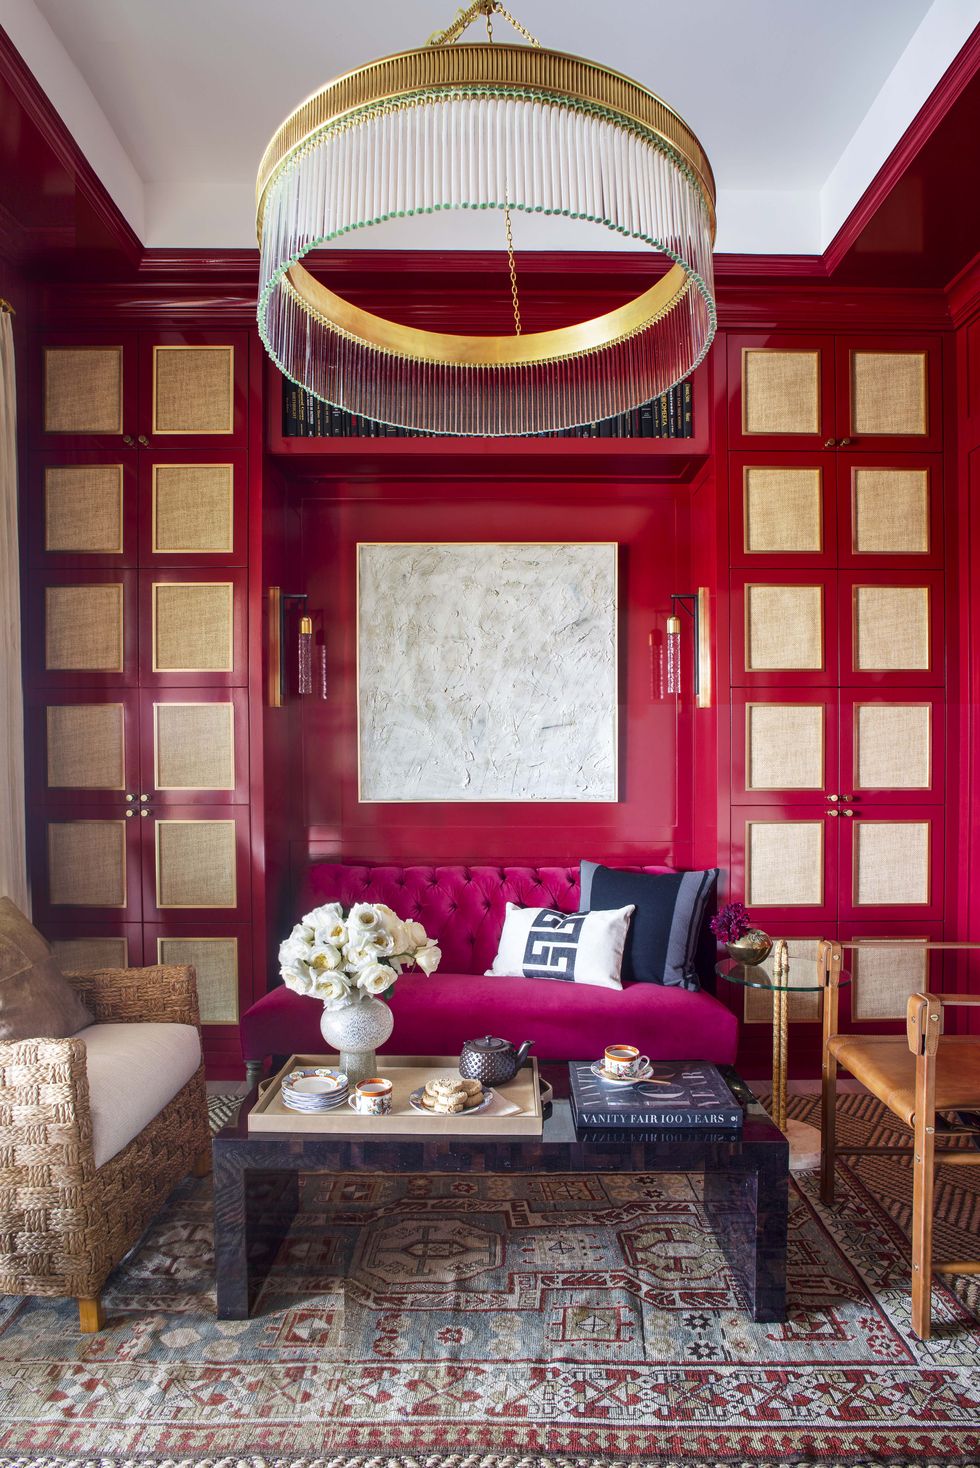 20 Ways to Decorate With Red in the Living Room, From a Pro